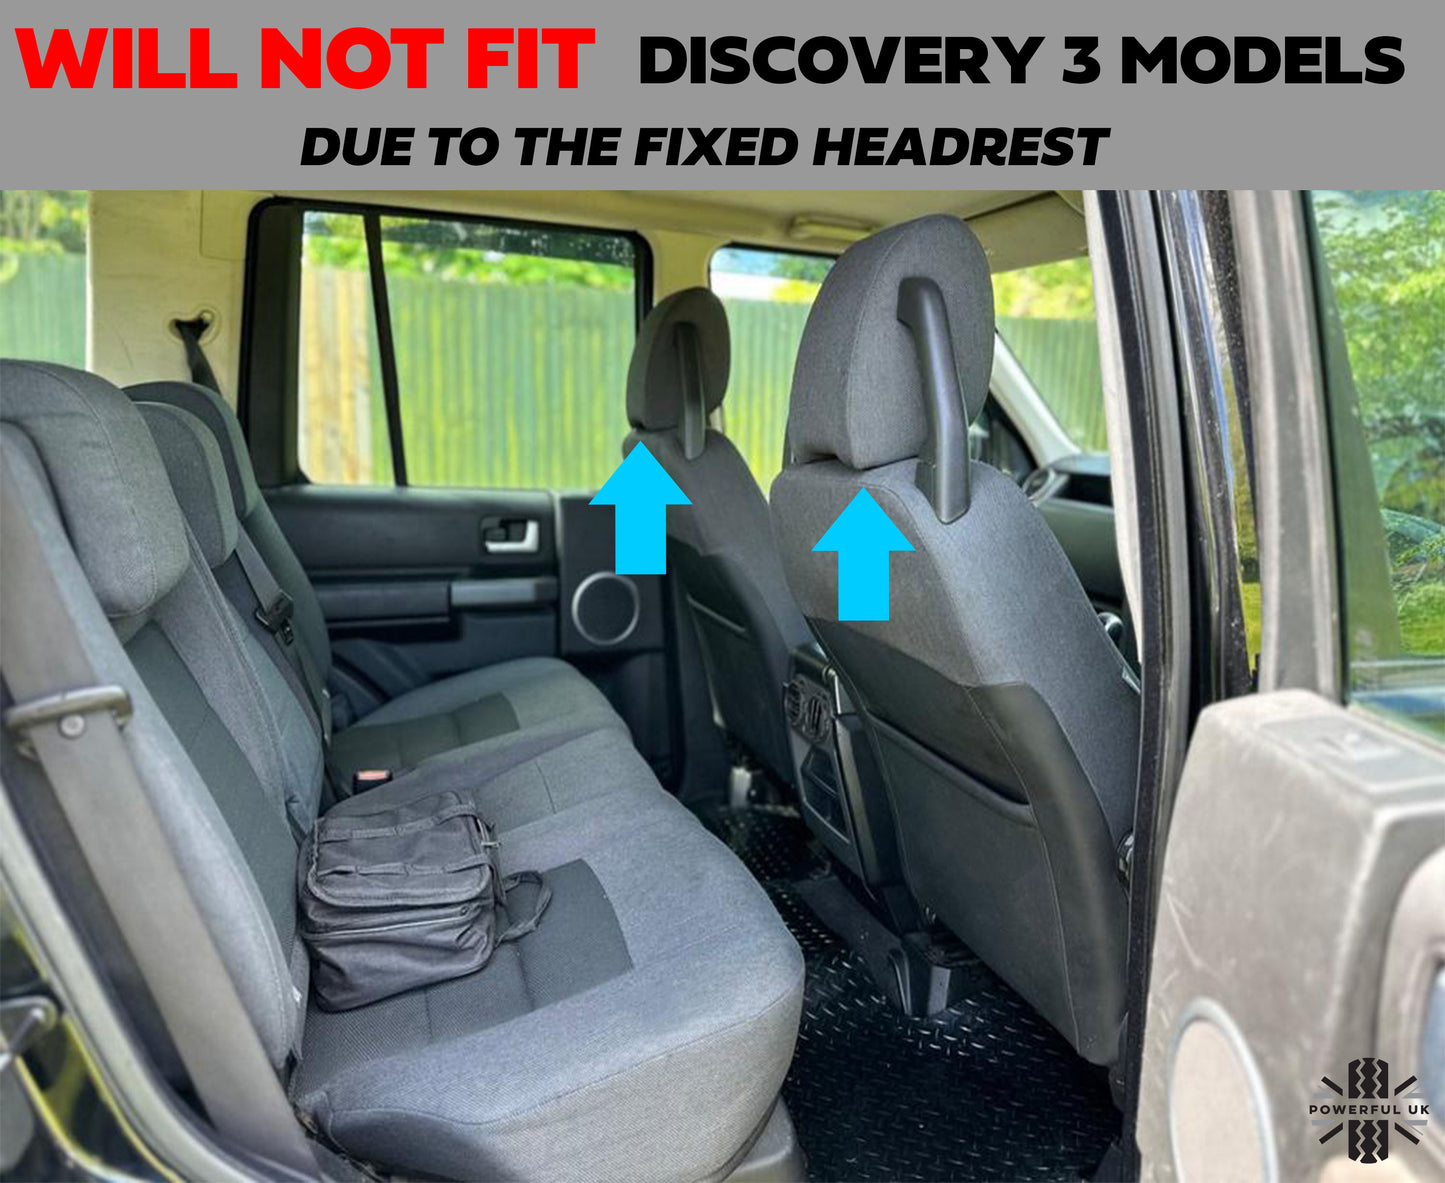 Click+Go Base for Land Rover Discovery 4